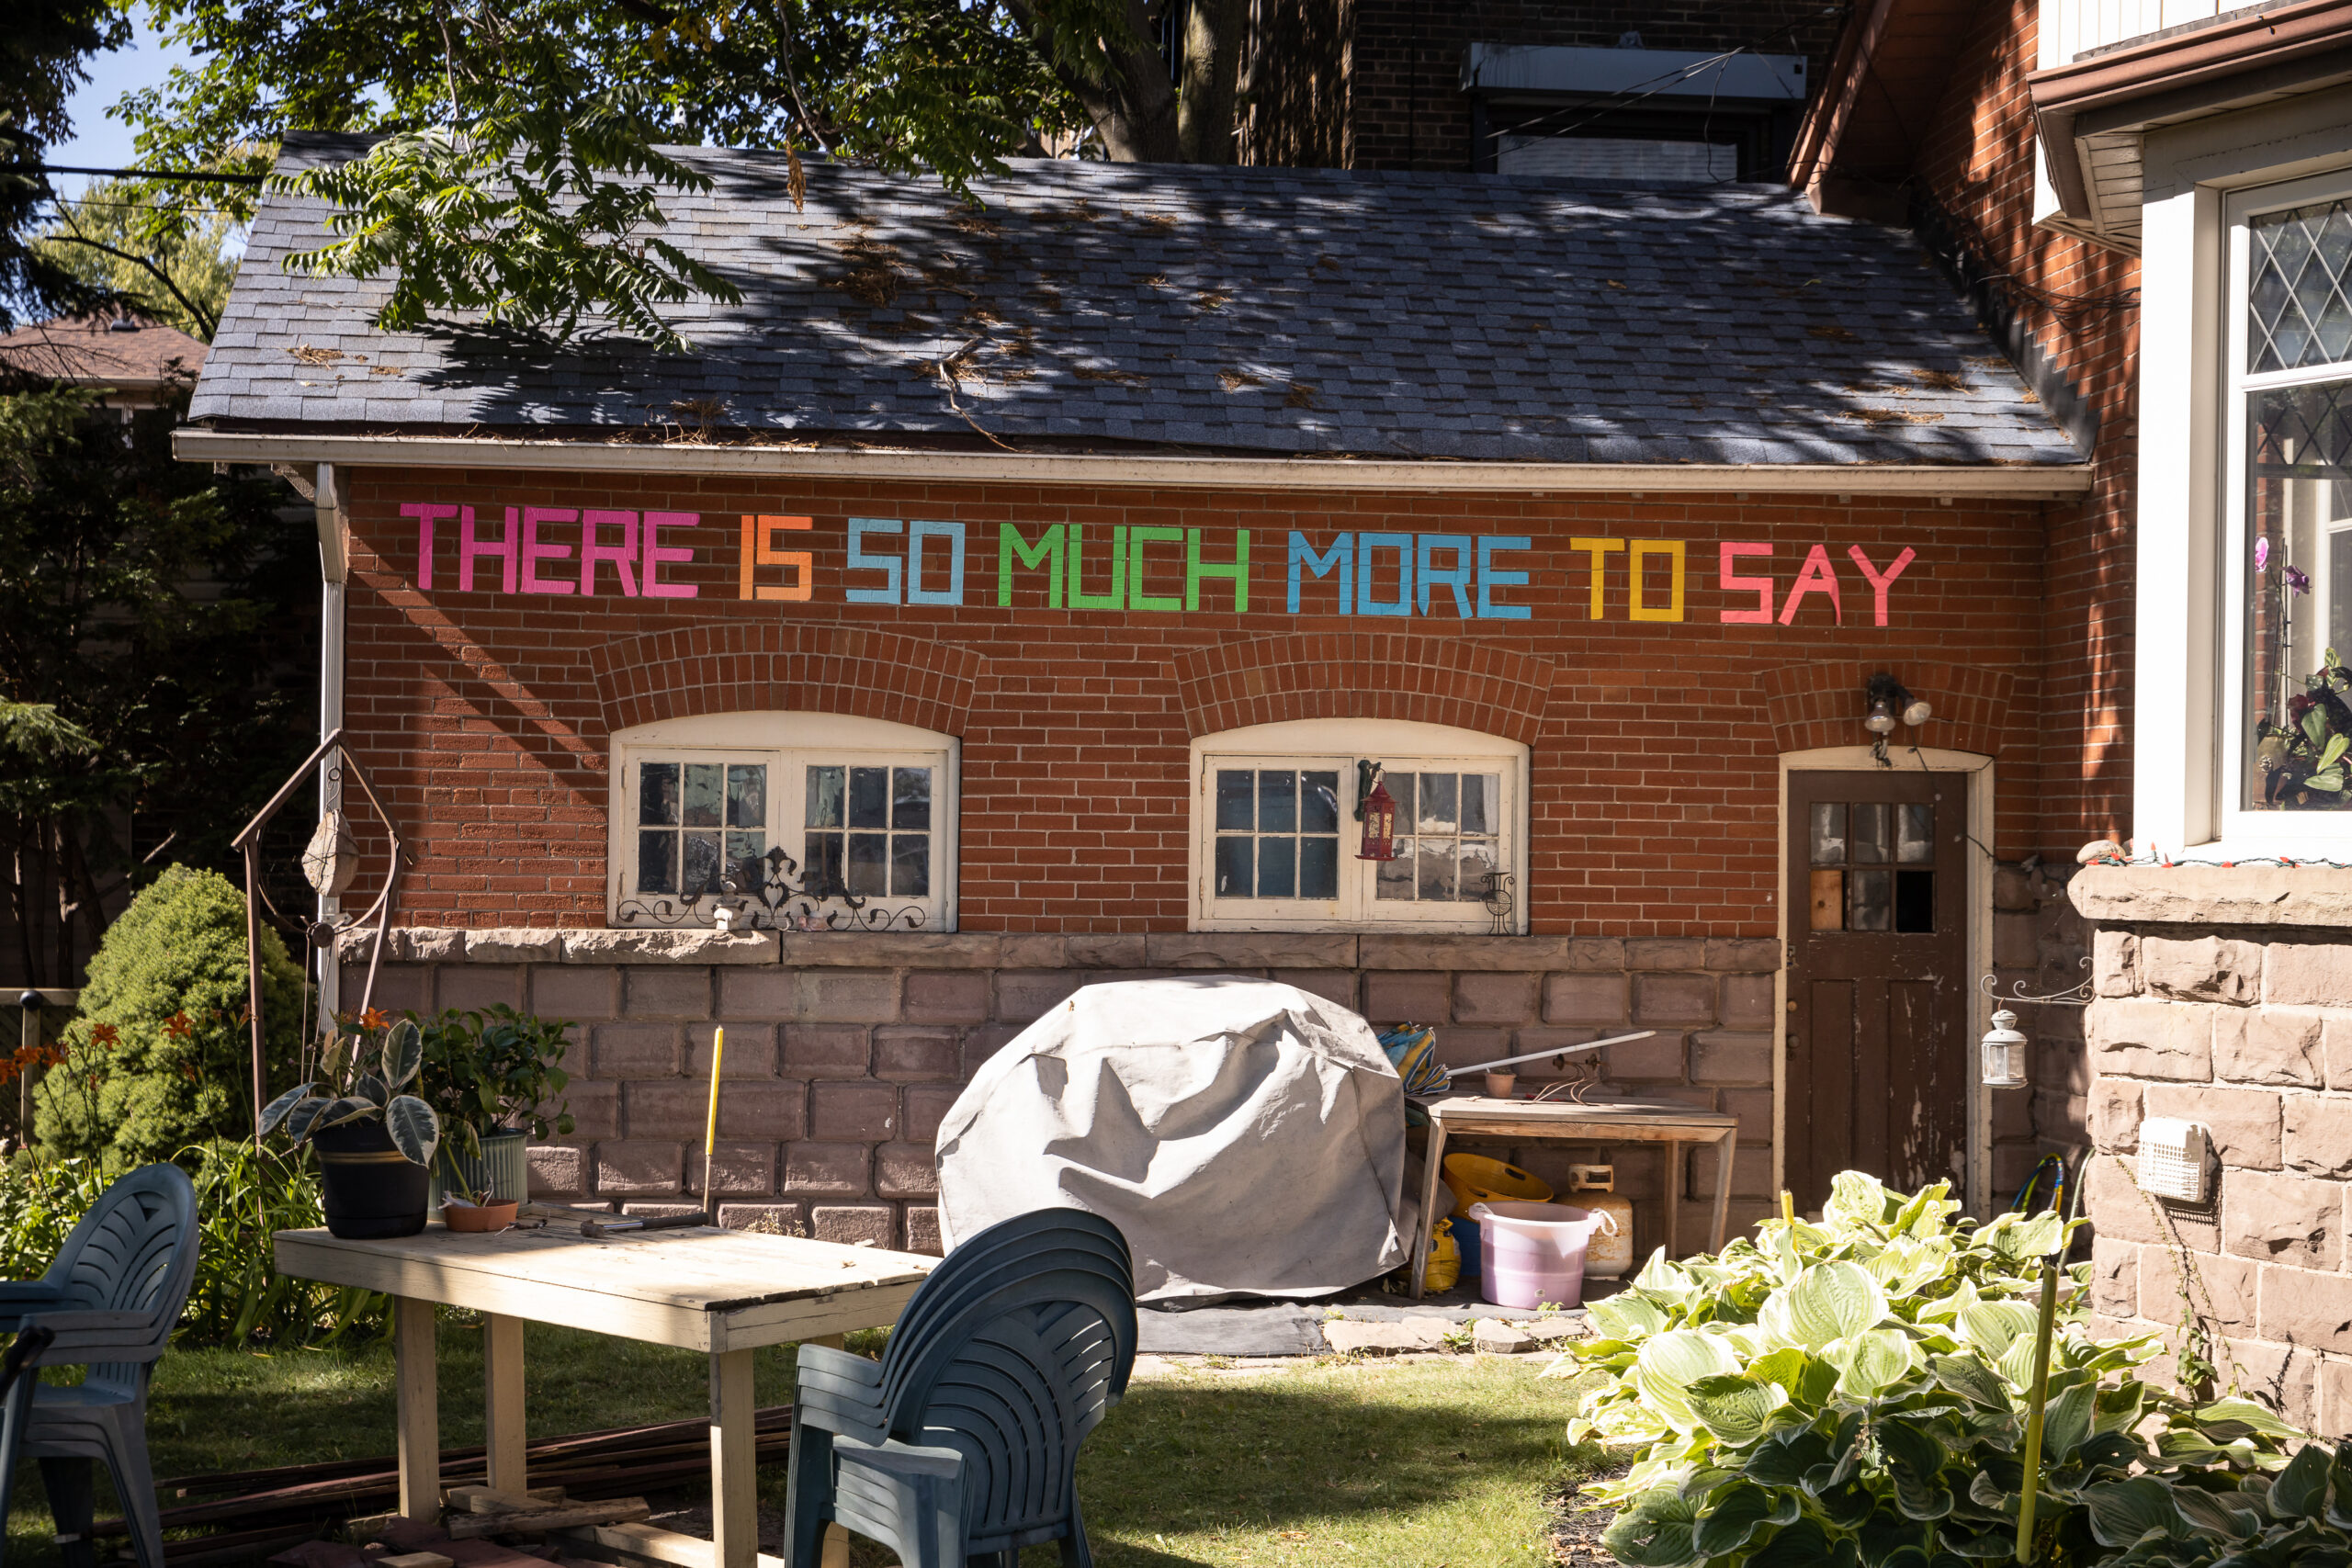 The words 'There is so much more to say' is written in colourful tape on the brick wall of a residence in the daytime.